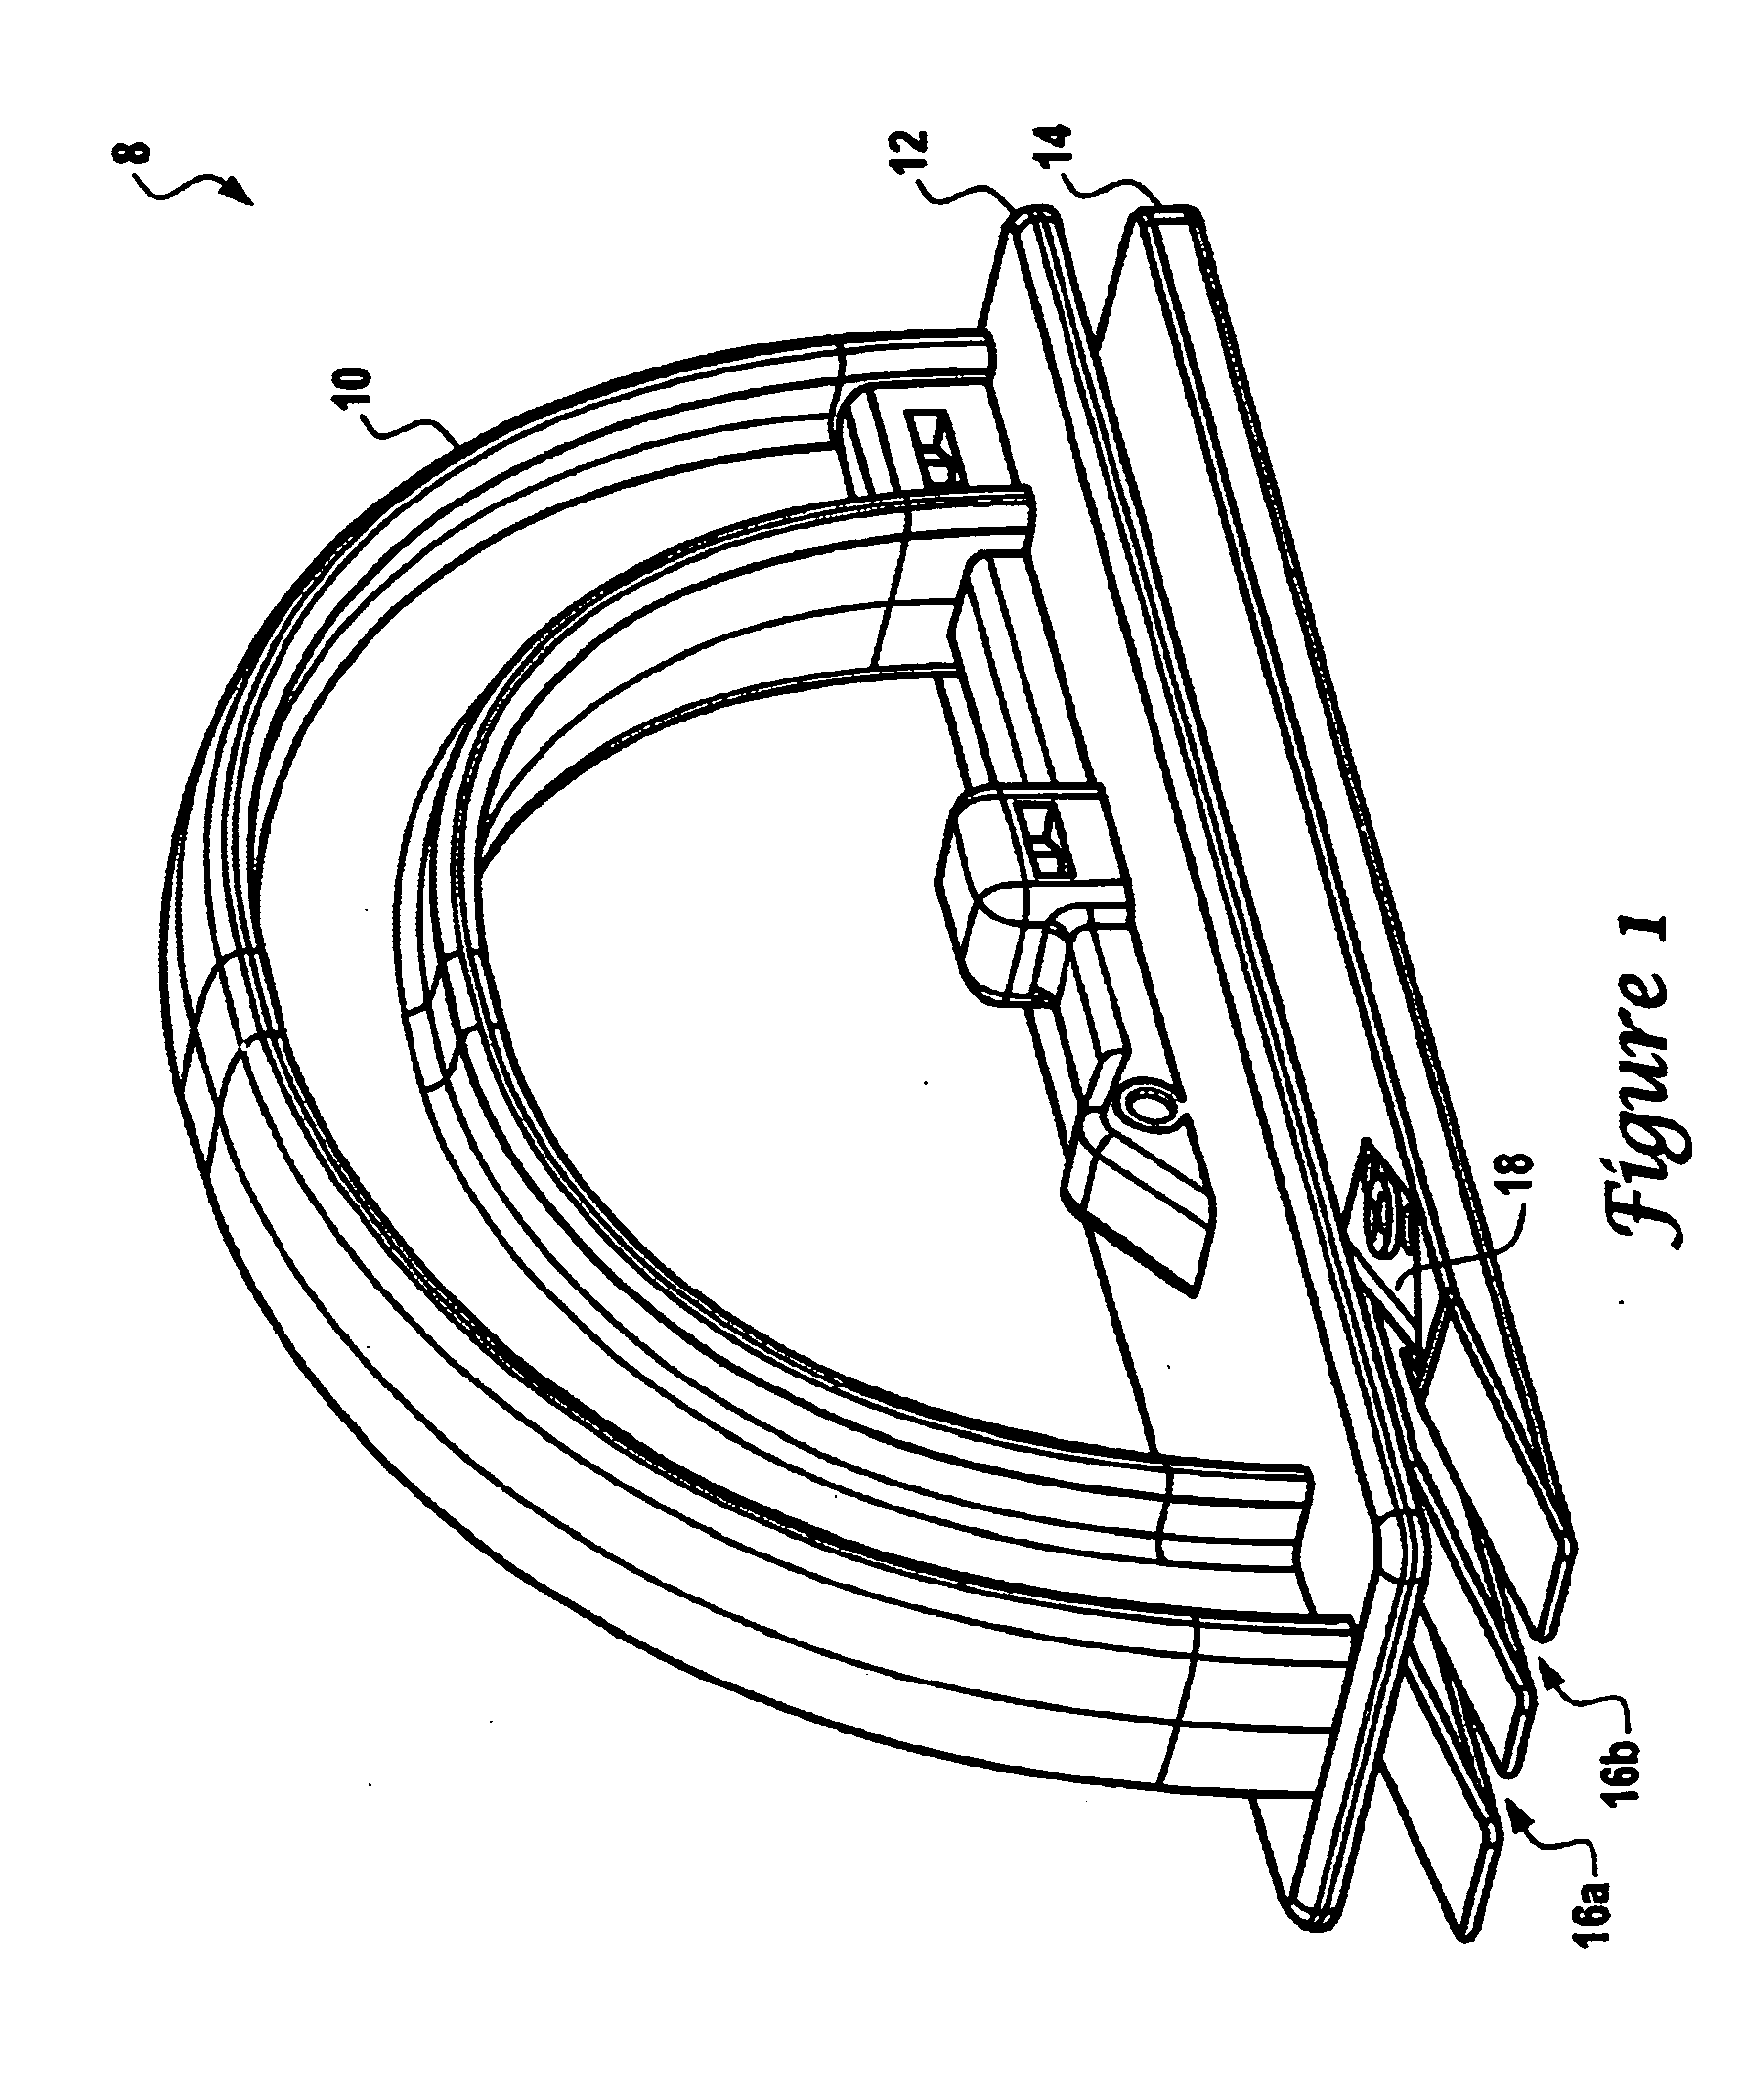 Method and apparatus for cutting materials